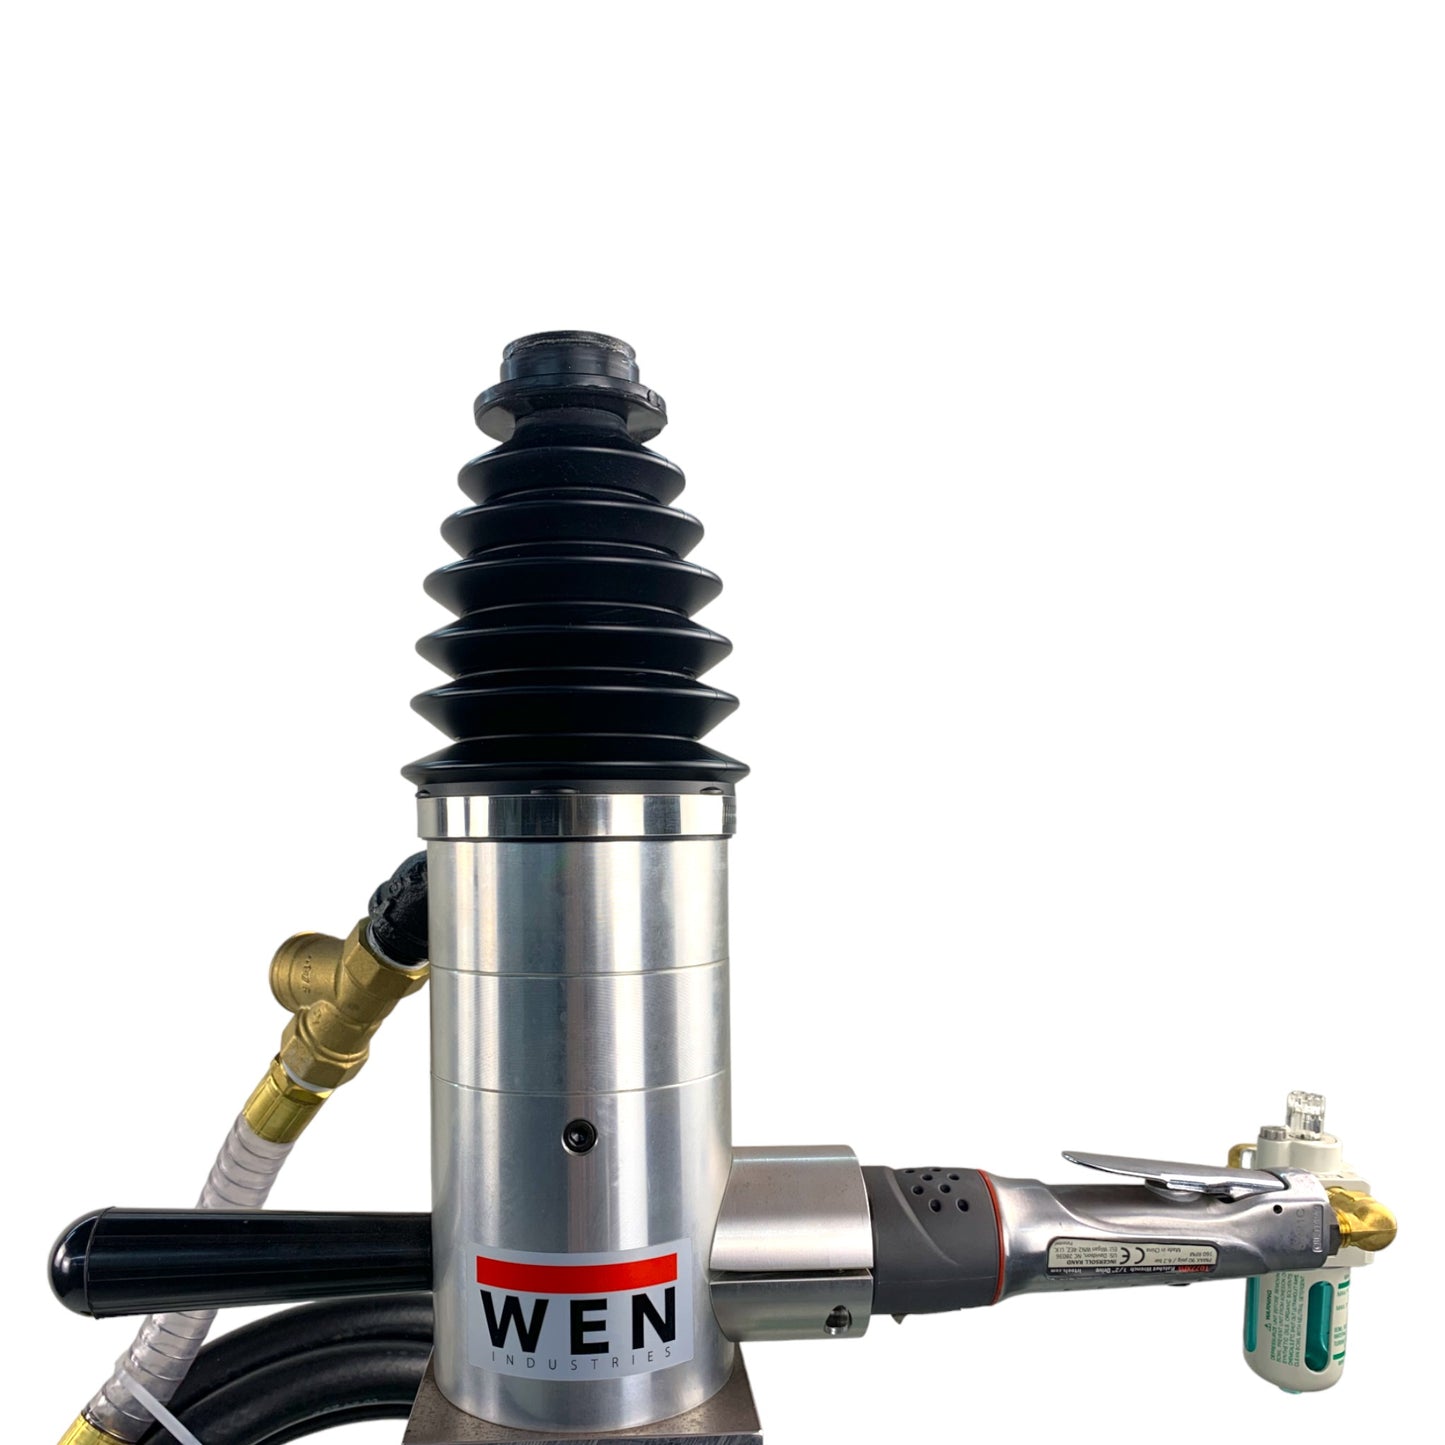 TD700 Diesel Fuel Tank Drill System (For use with a WEN Diesel Buggy®)